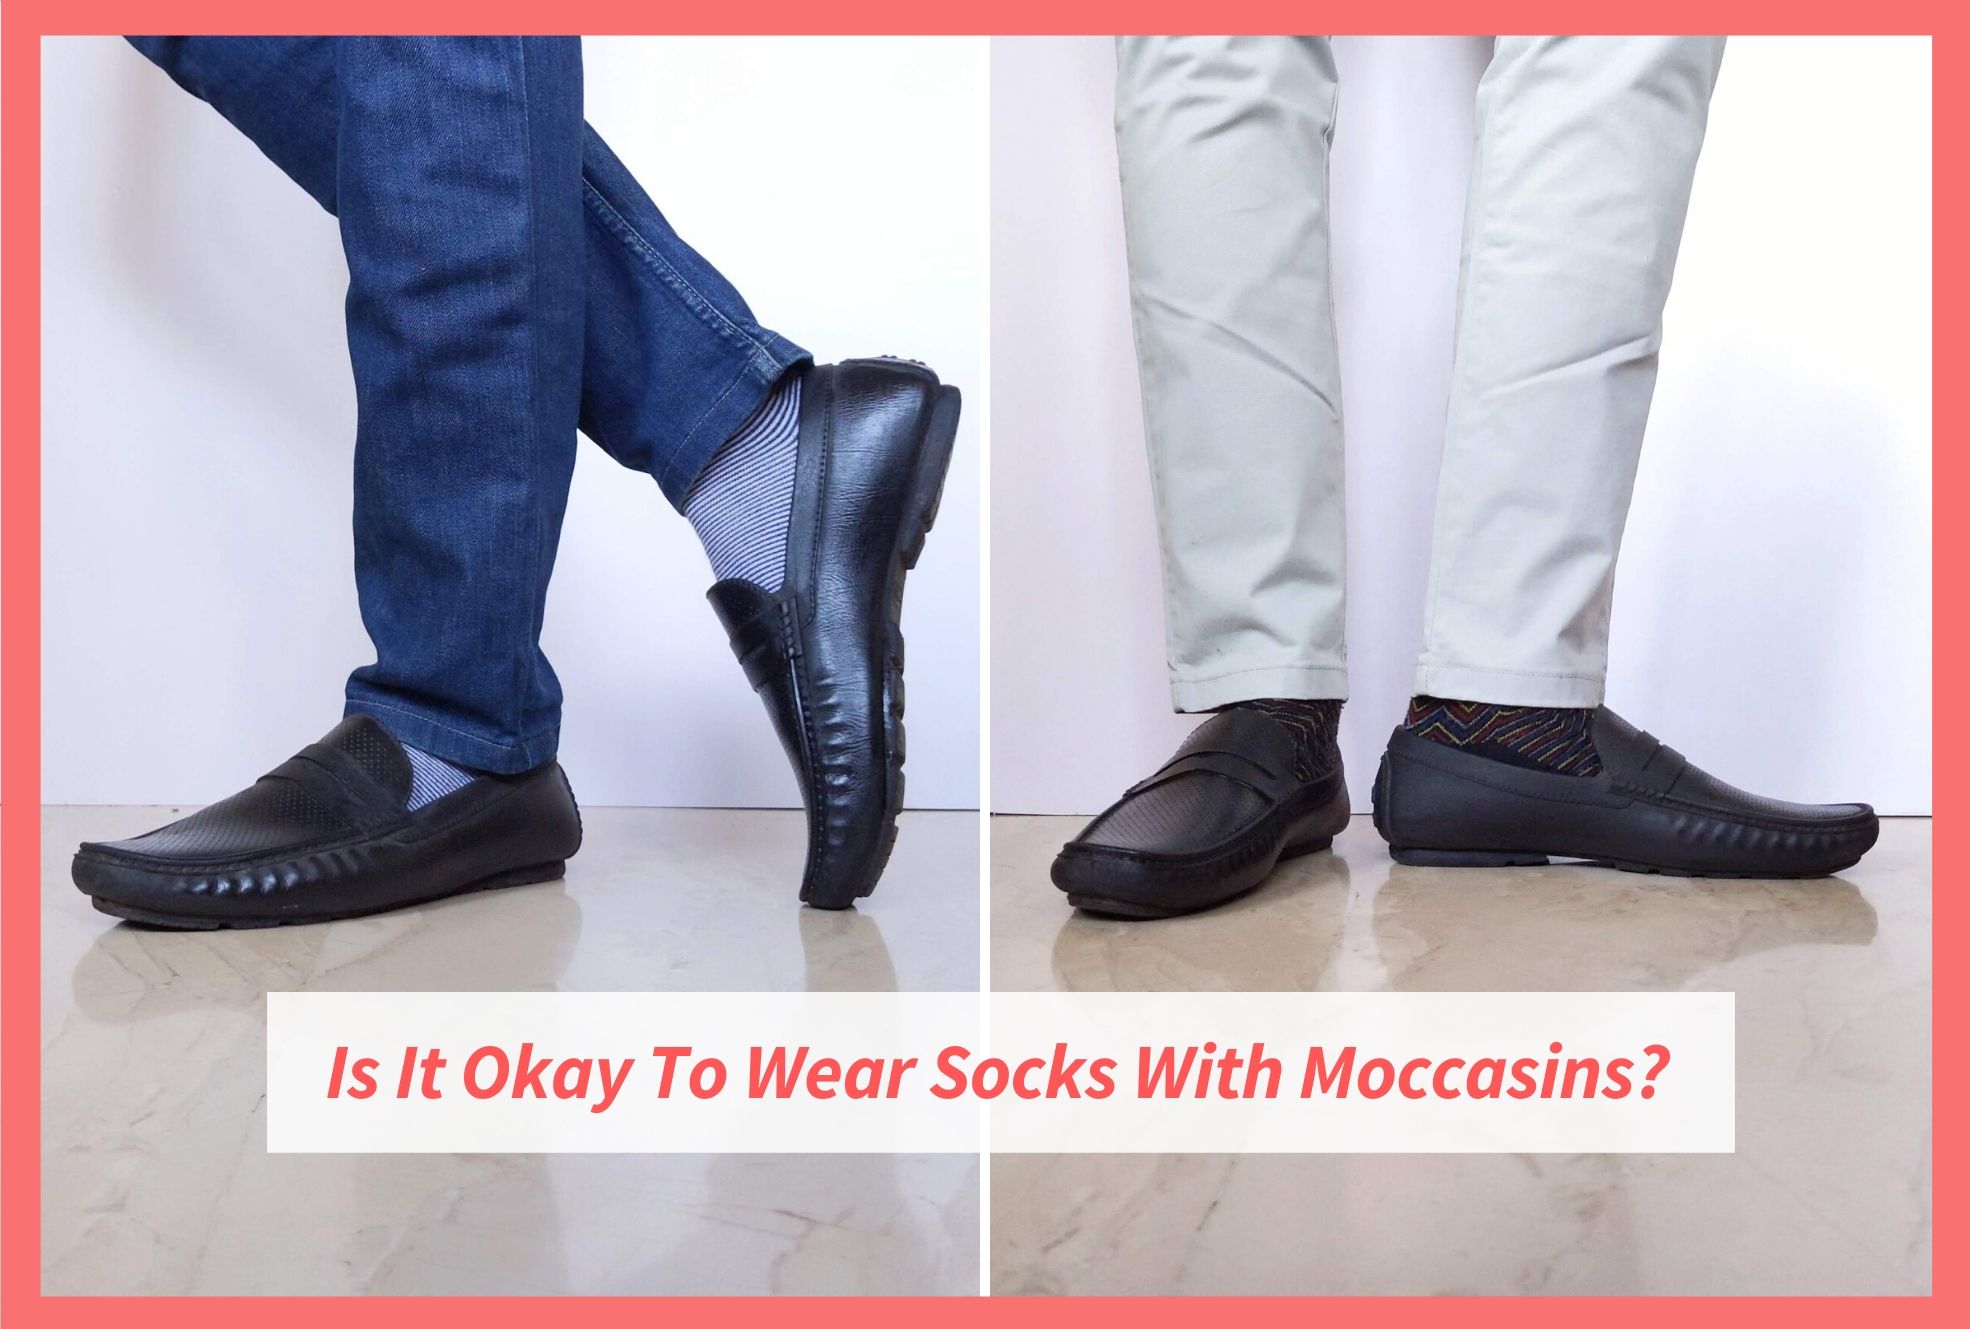 Can You With Moccasins? - Shoestopper